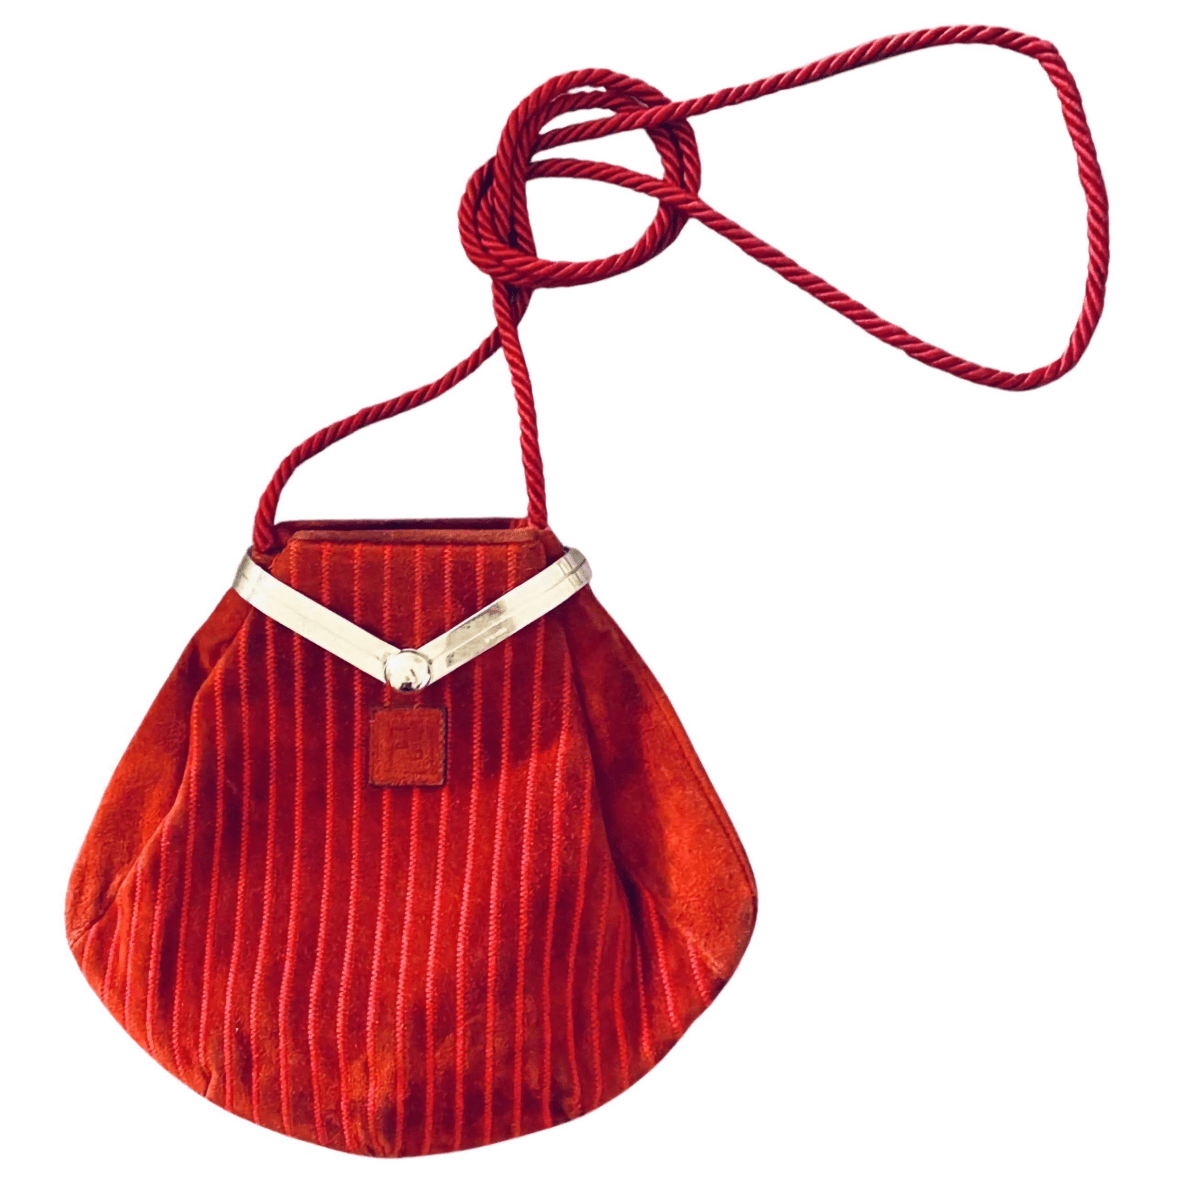 1980s Fendi Red Suede Metal Closure Pouch Crossbody Bag - style - CHNGR